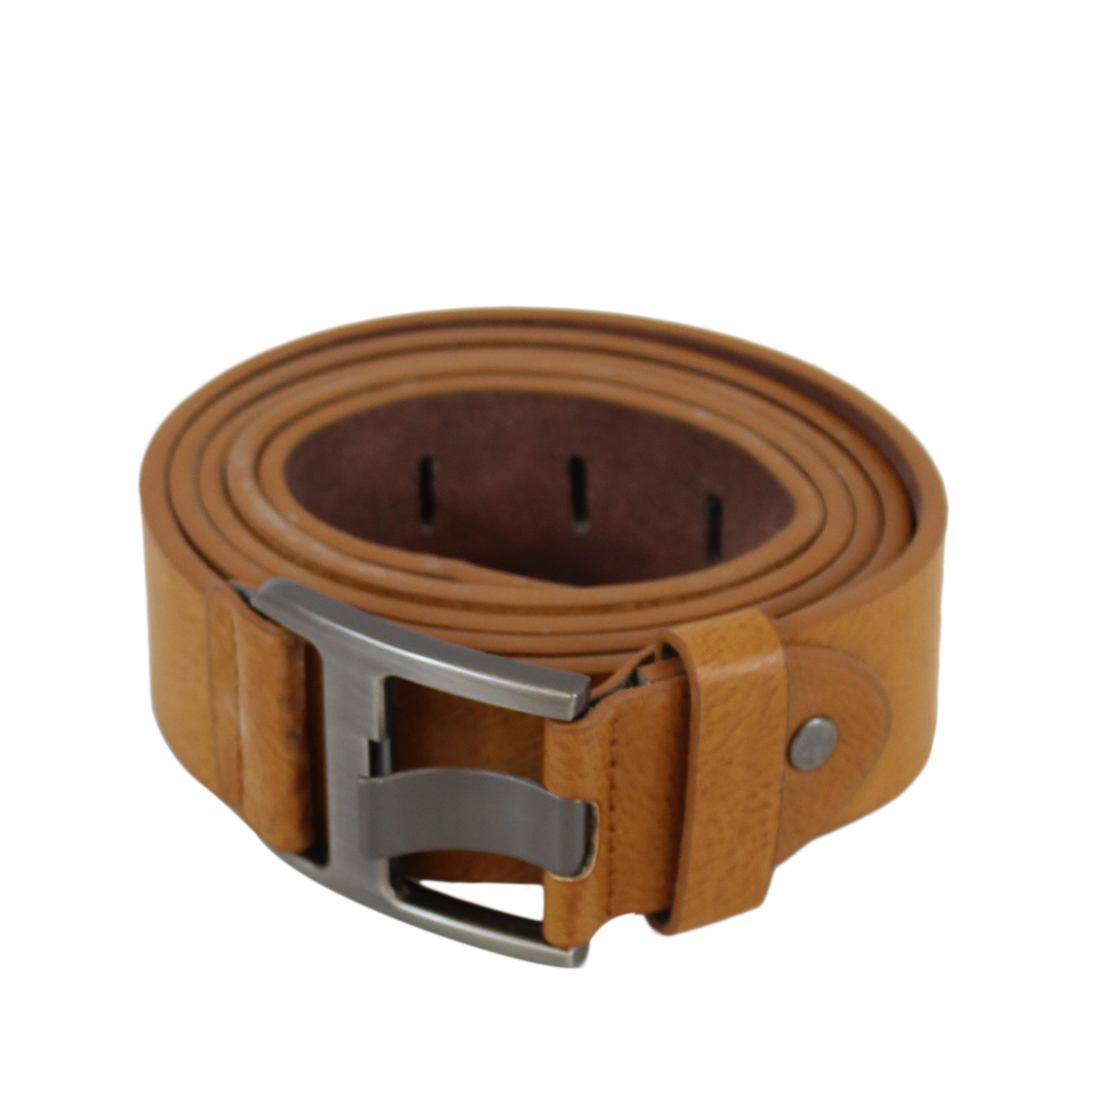 Plain wide leather belt with silver leathered buckle